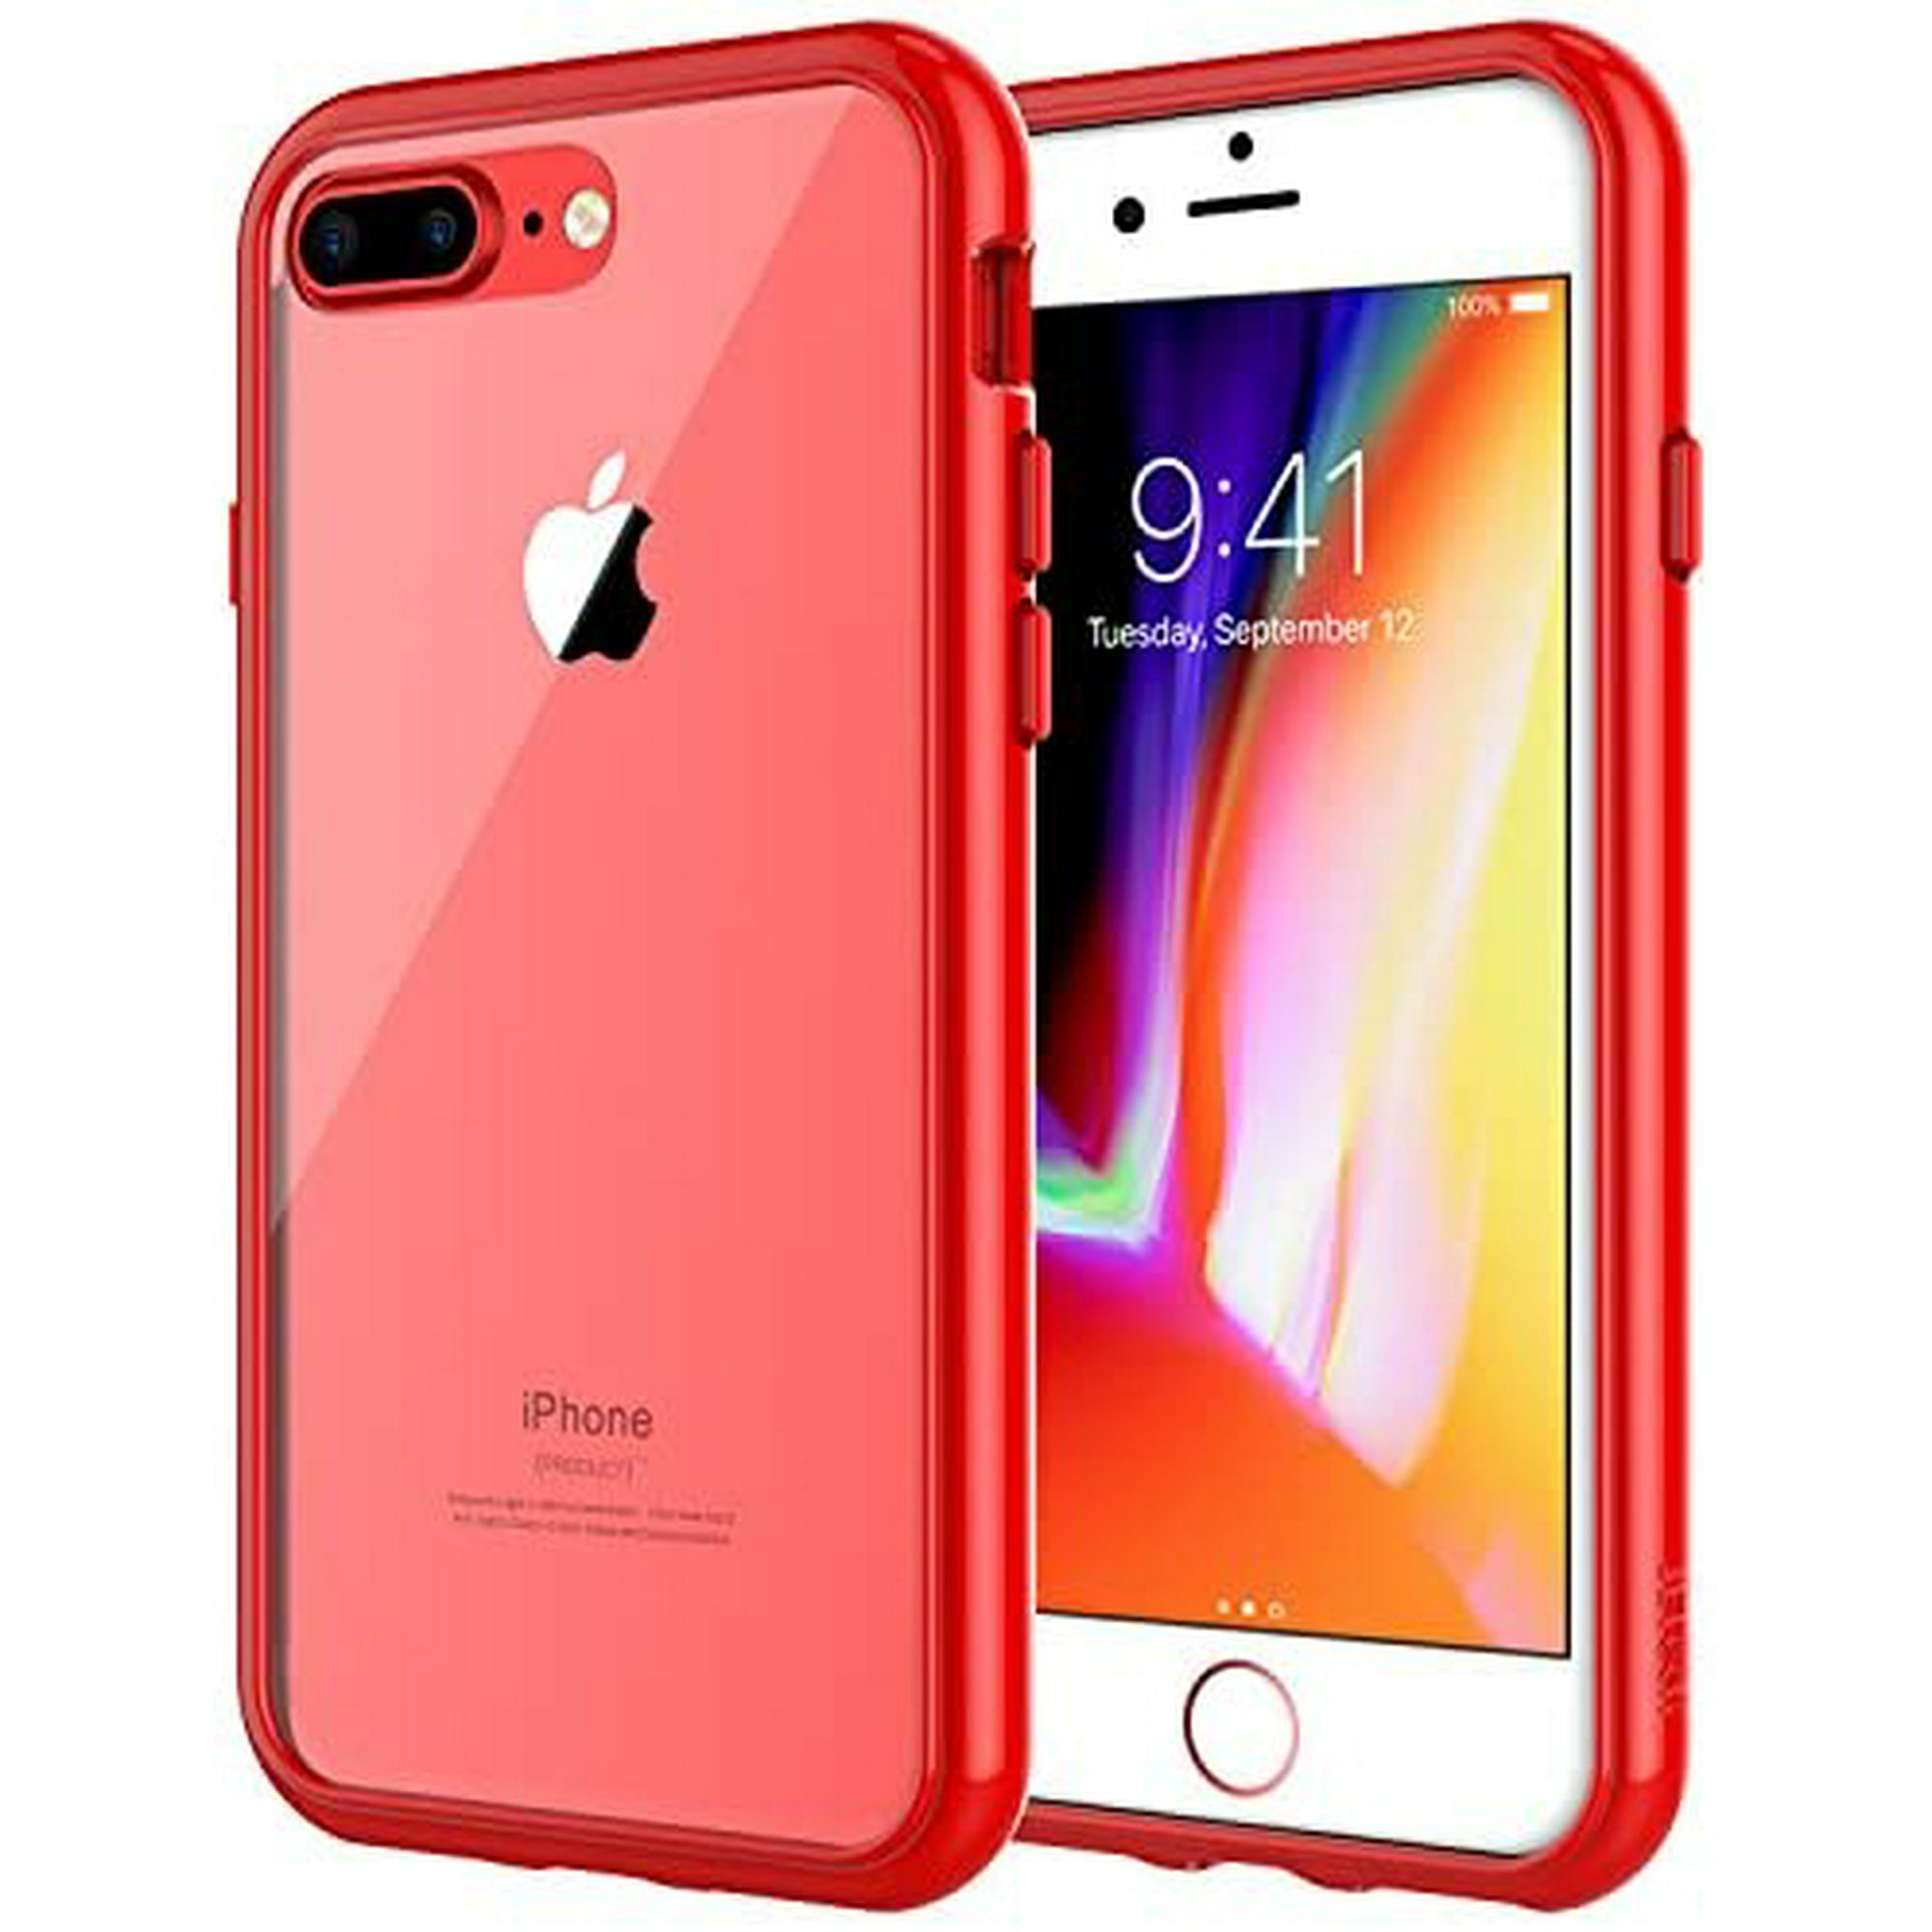 JETech Case for iPhone 8 Plus and iPhone 7 Plus, Shock-Absorption Bumper Cover, Anti-Scratch Clear Back, Red | Walmart Canada